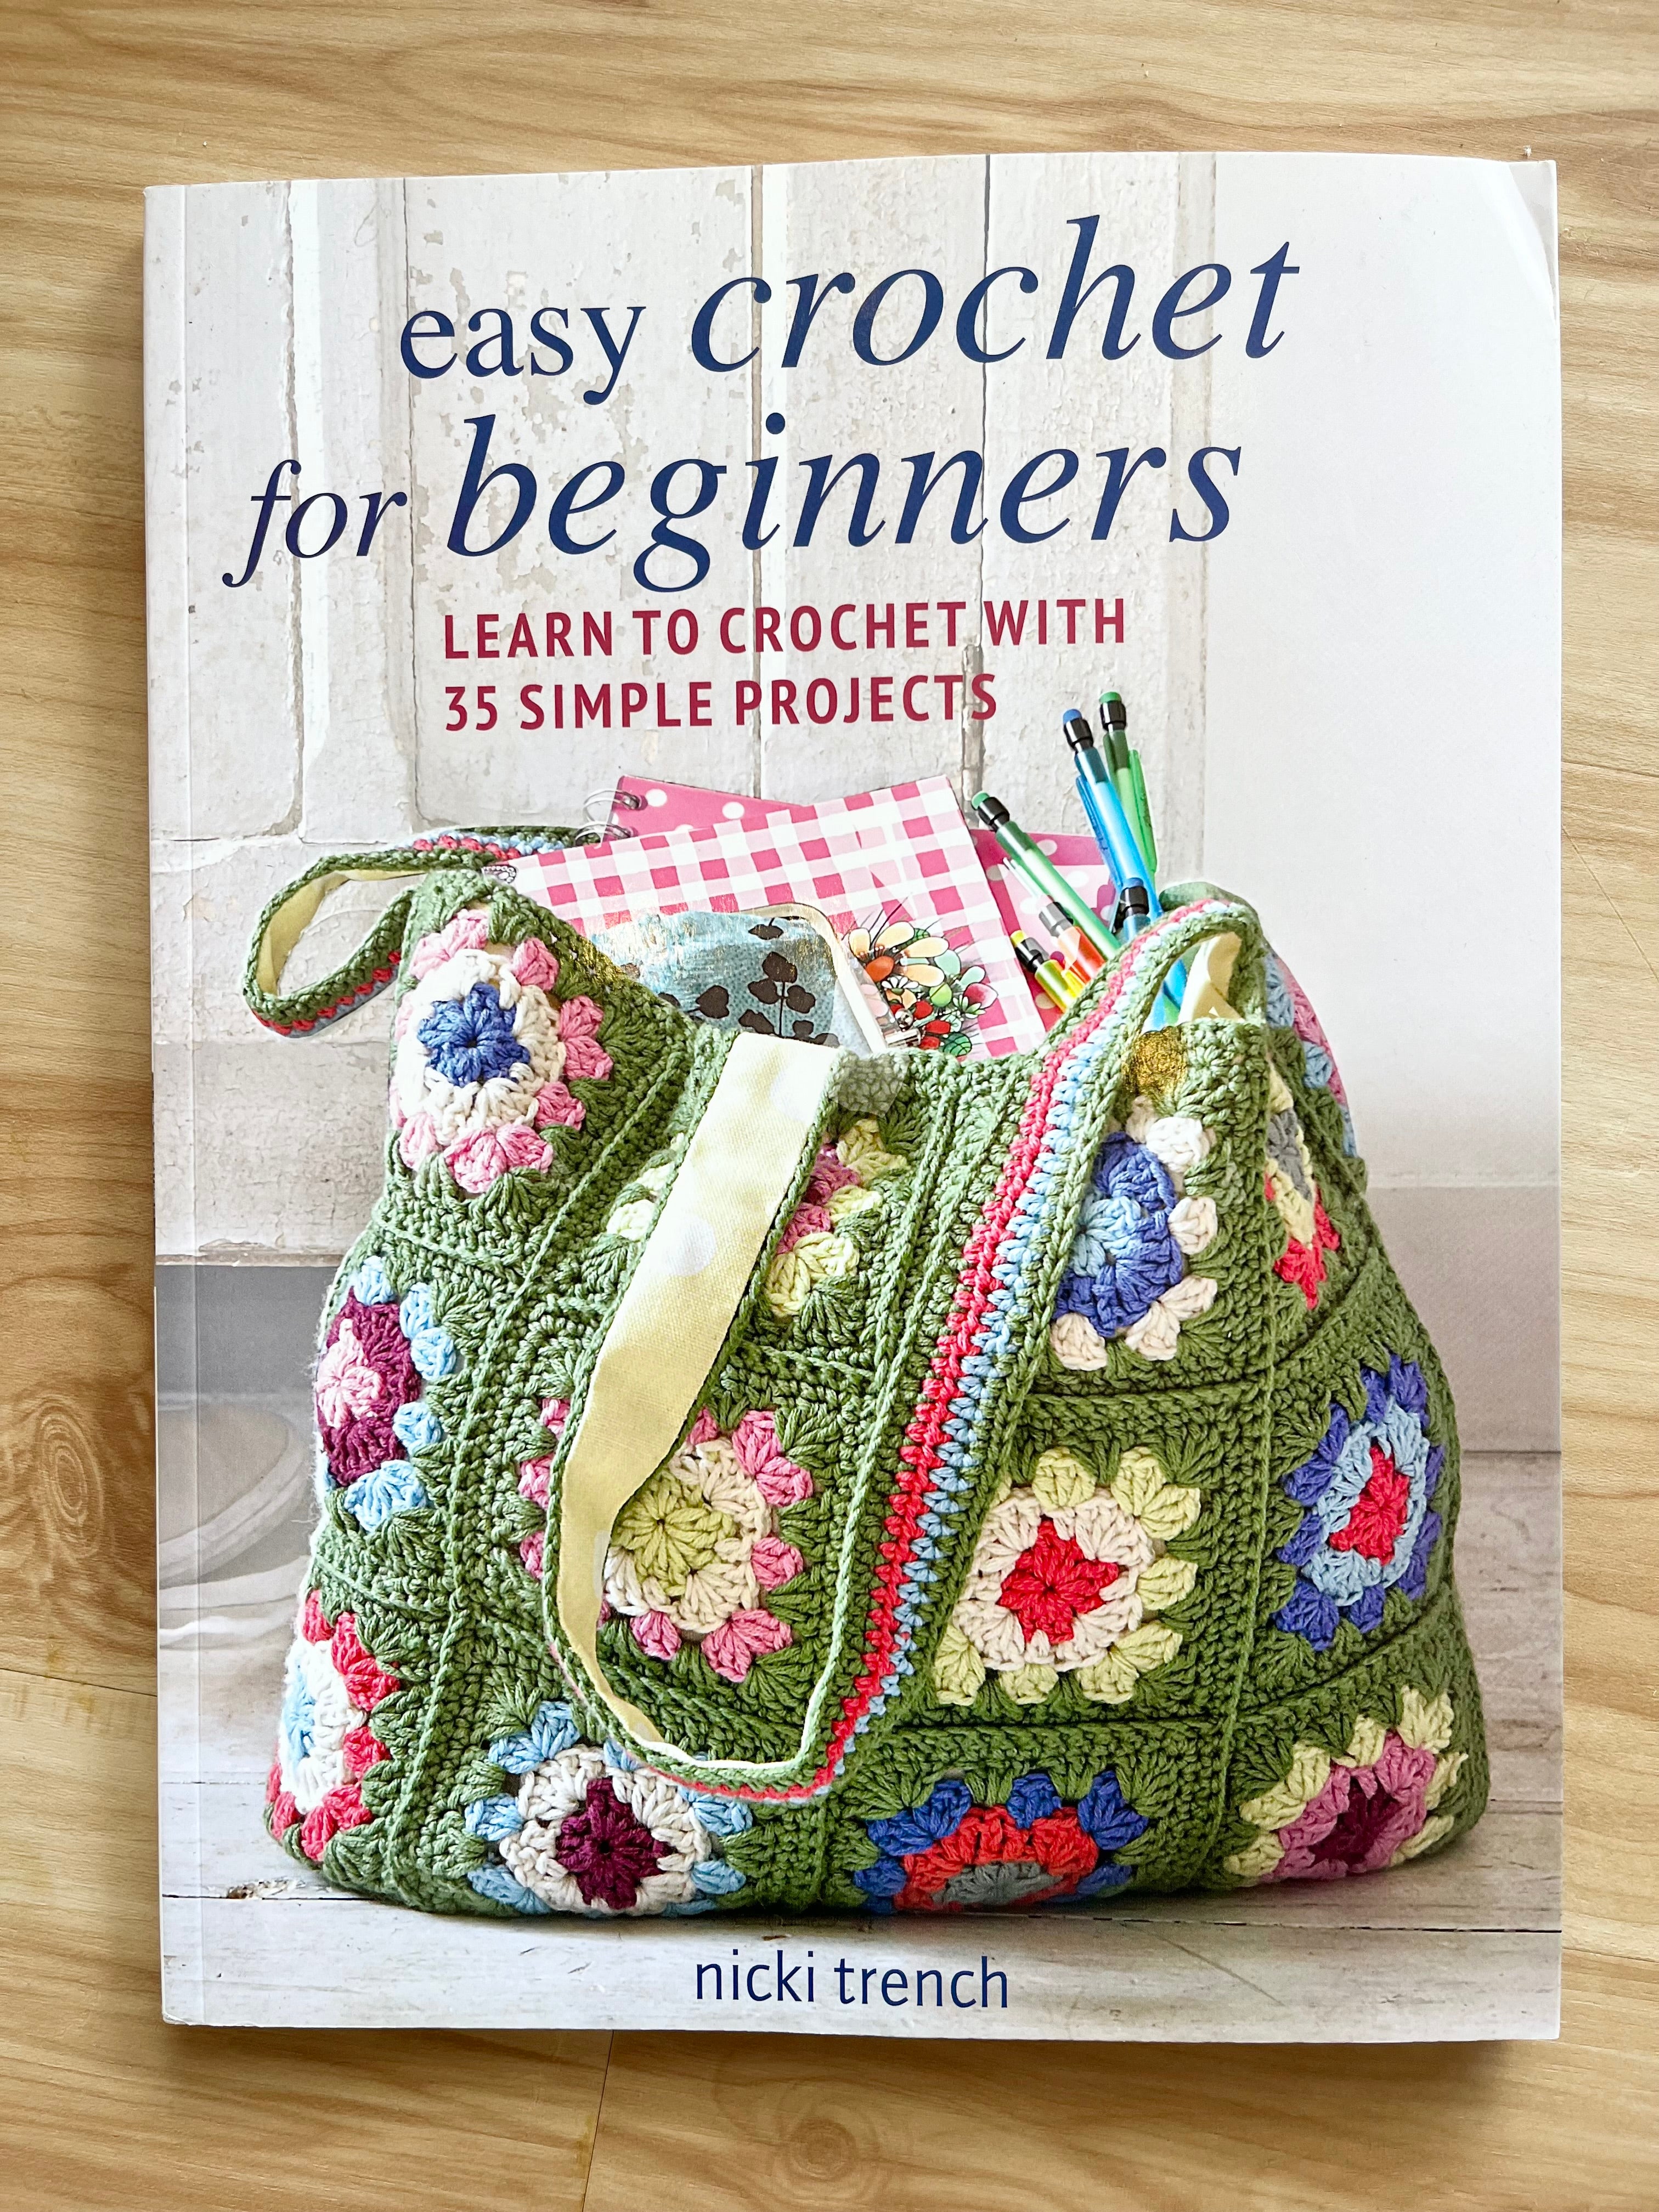 Easy Crochet for Beginners: Learn to crochet with 35 simple projects